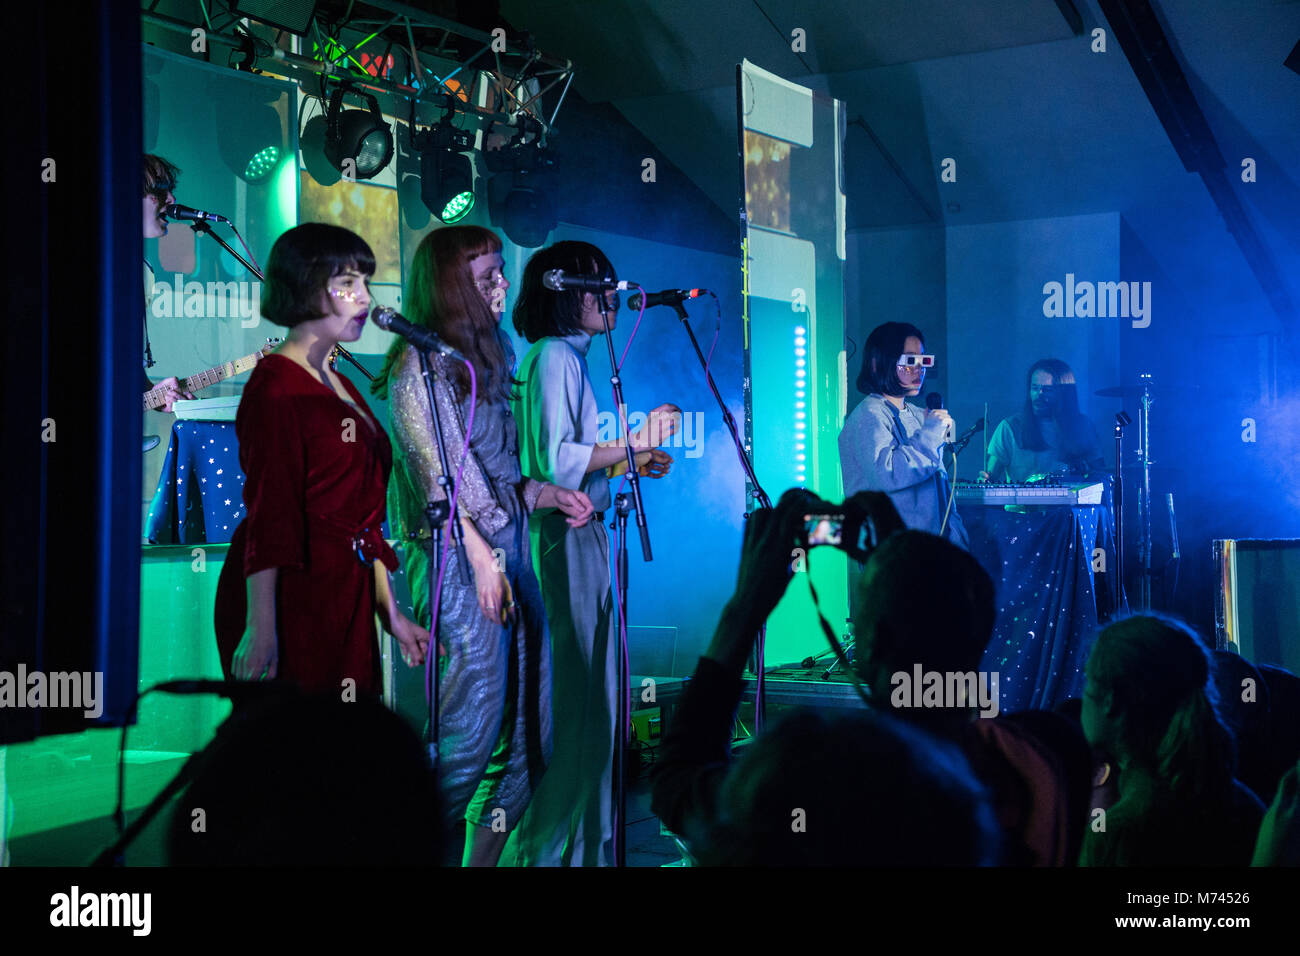 London, UK. 8th March, 2018. Superorganism performing live on stage at Oval Space in London. Photo date: Thursday, March 8, 2018. Credit: Roger Garfield/Alamy Live News Stock Photo